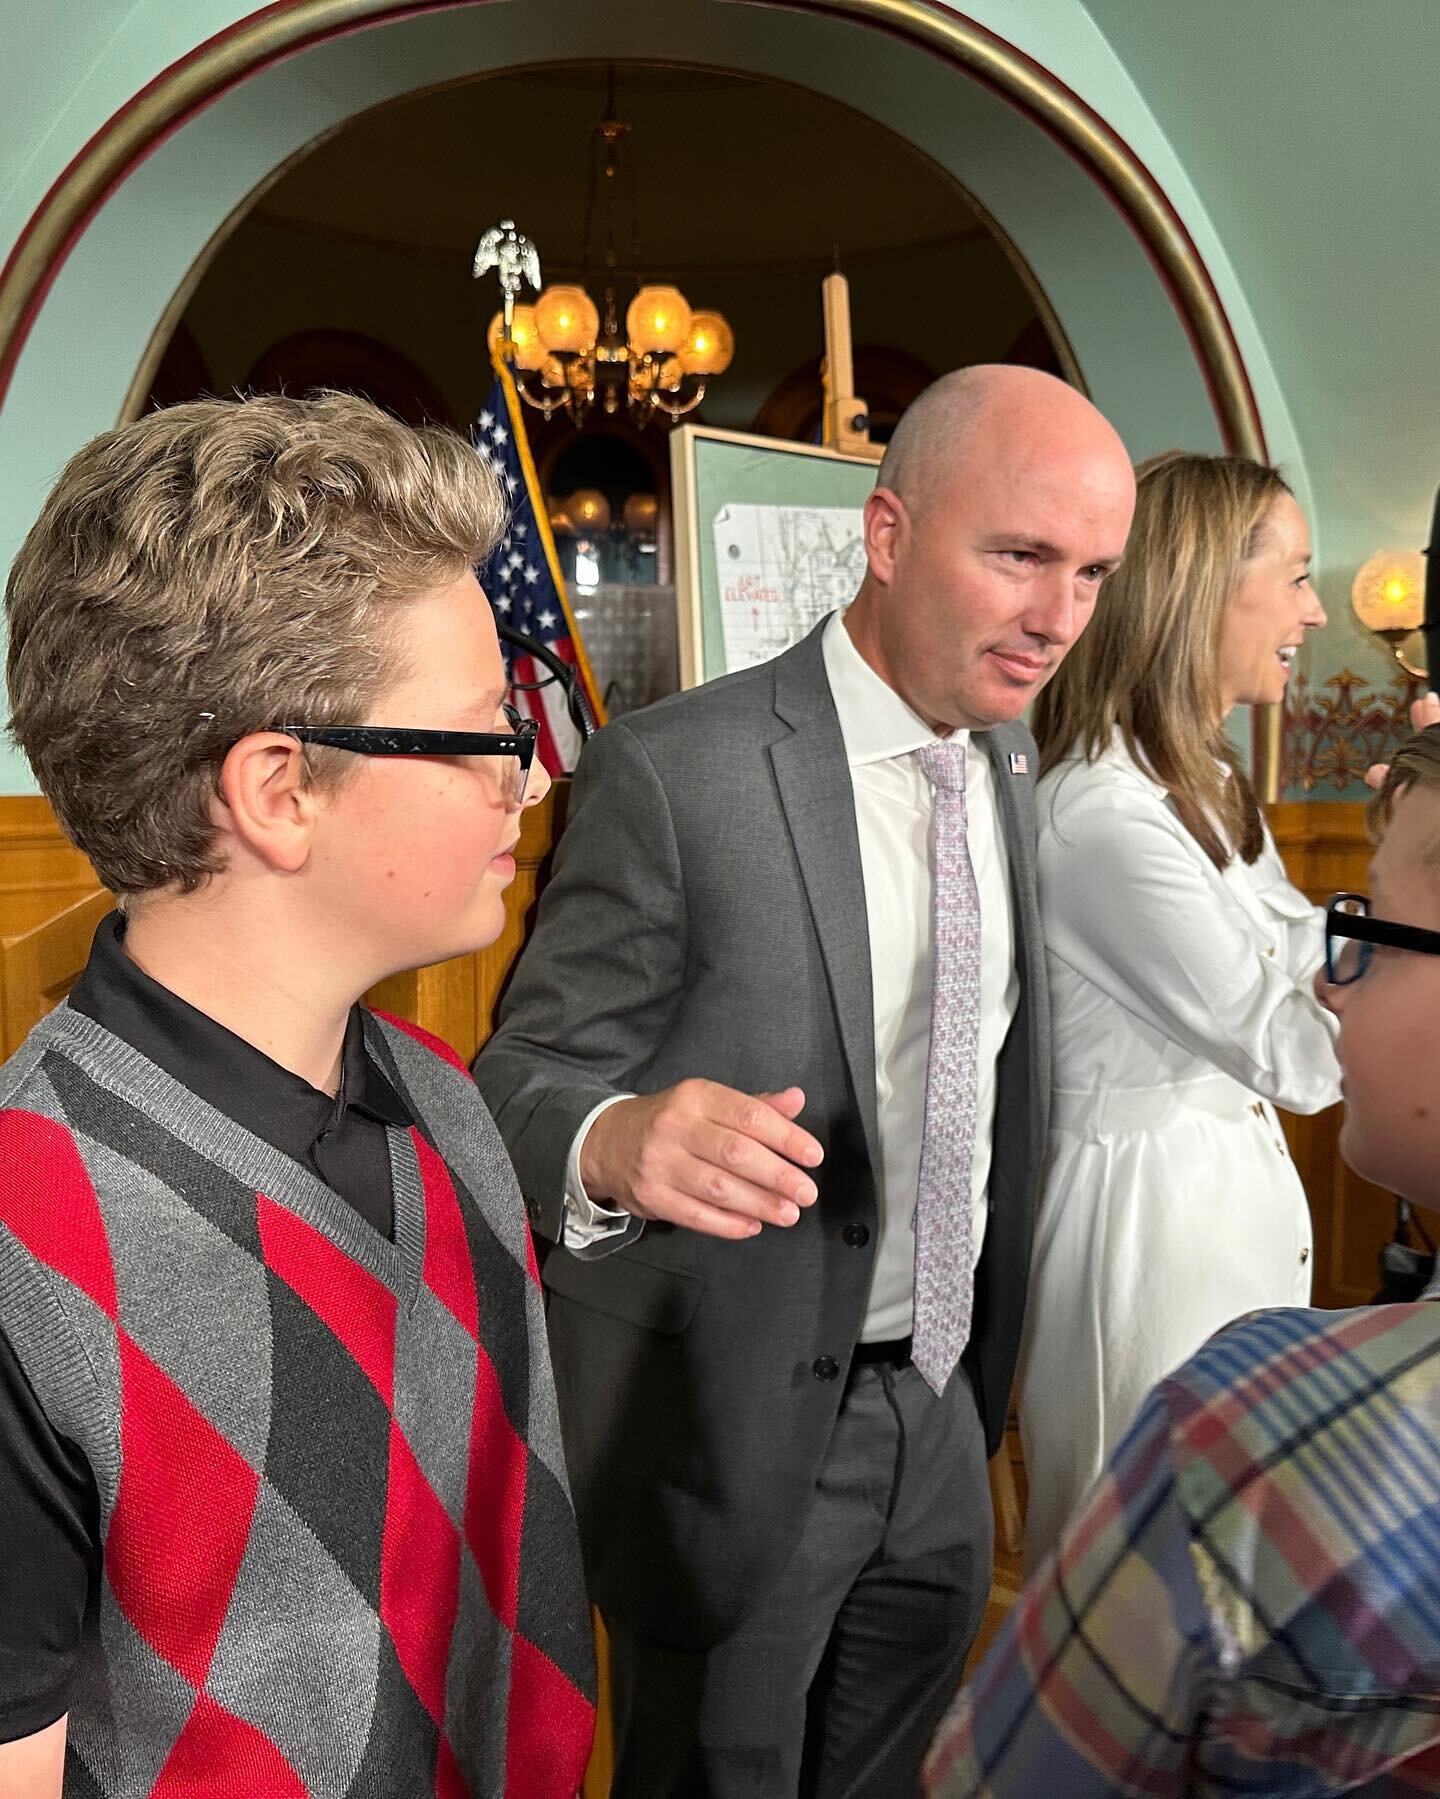 In a night full of highlights, my two older sons getting to meet Governor Cox and the First Lady in the beautiful setting of Utah&rsquo;s Governors Mansion was a pinnacle; they&rsquo;ve been looking forward to it for months, as have we. And the whole